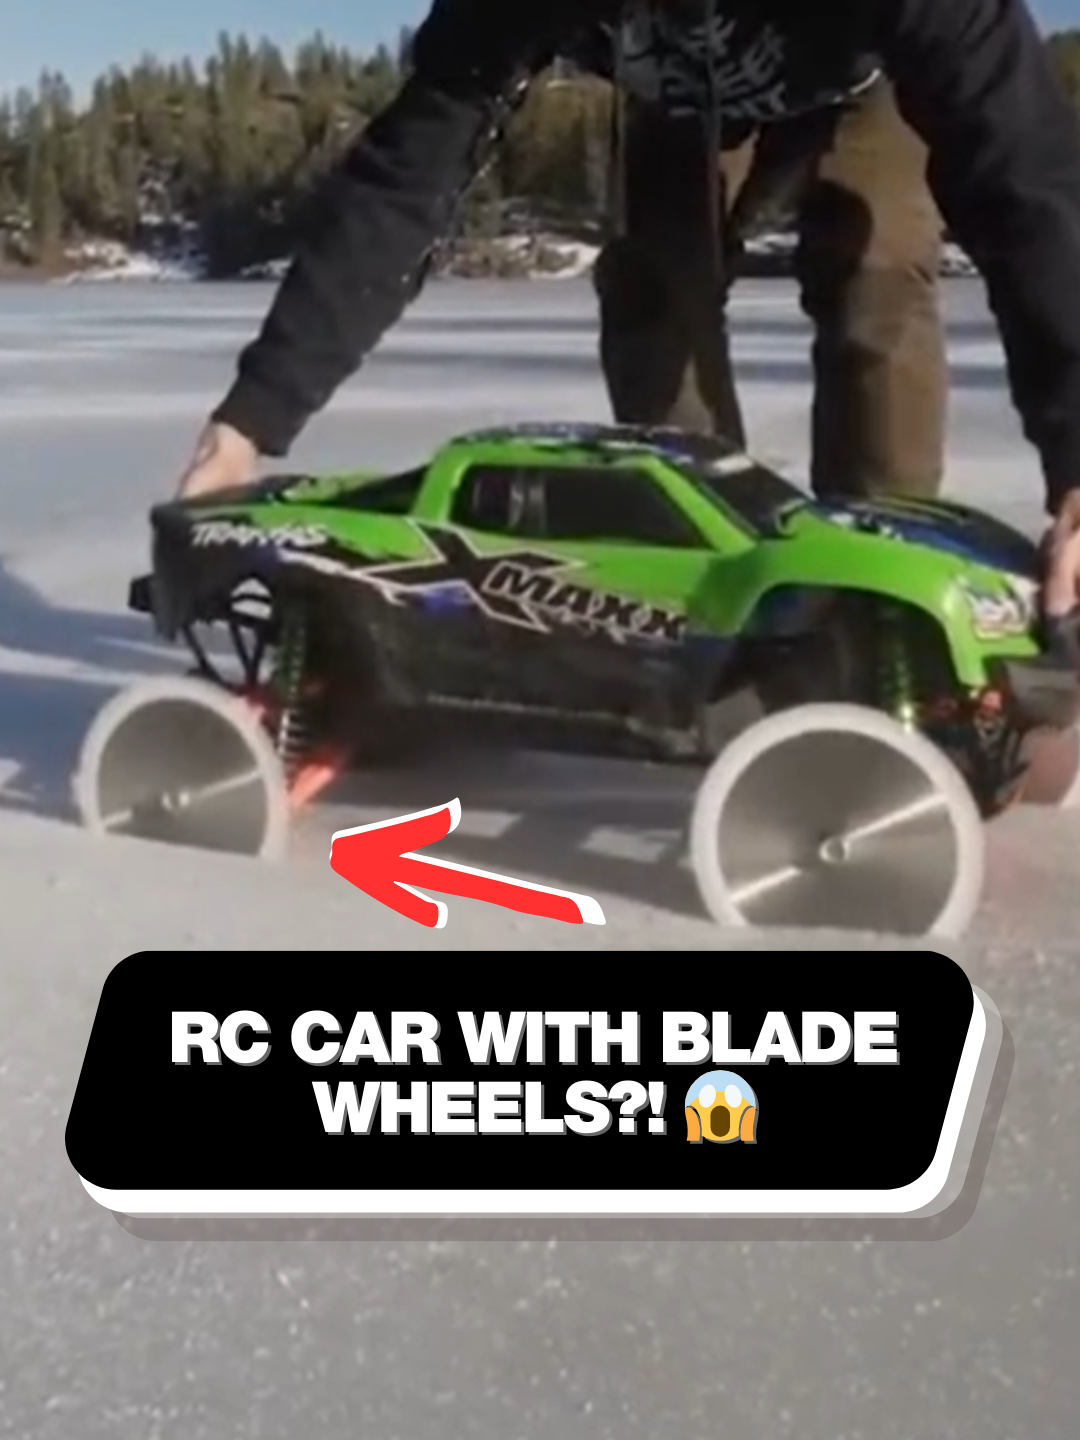 This is cutting-edge technology... literally! 🧊 #rccars #extreme #blade